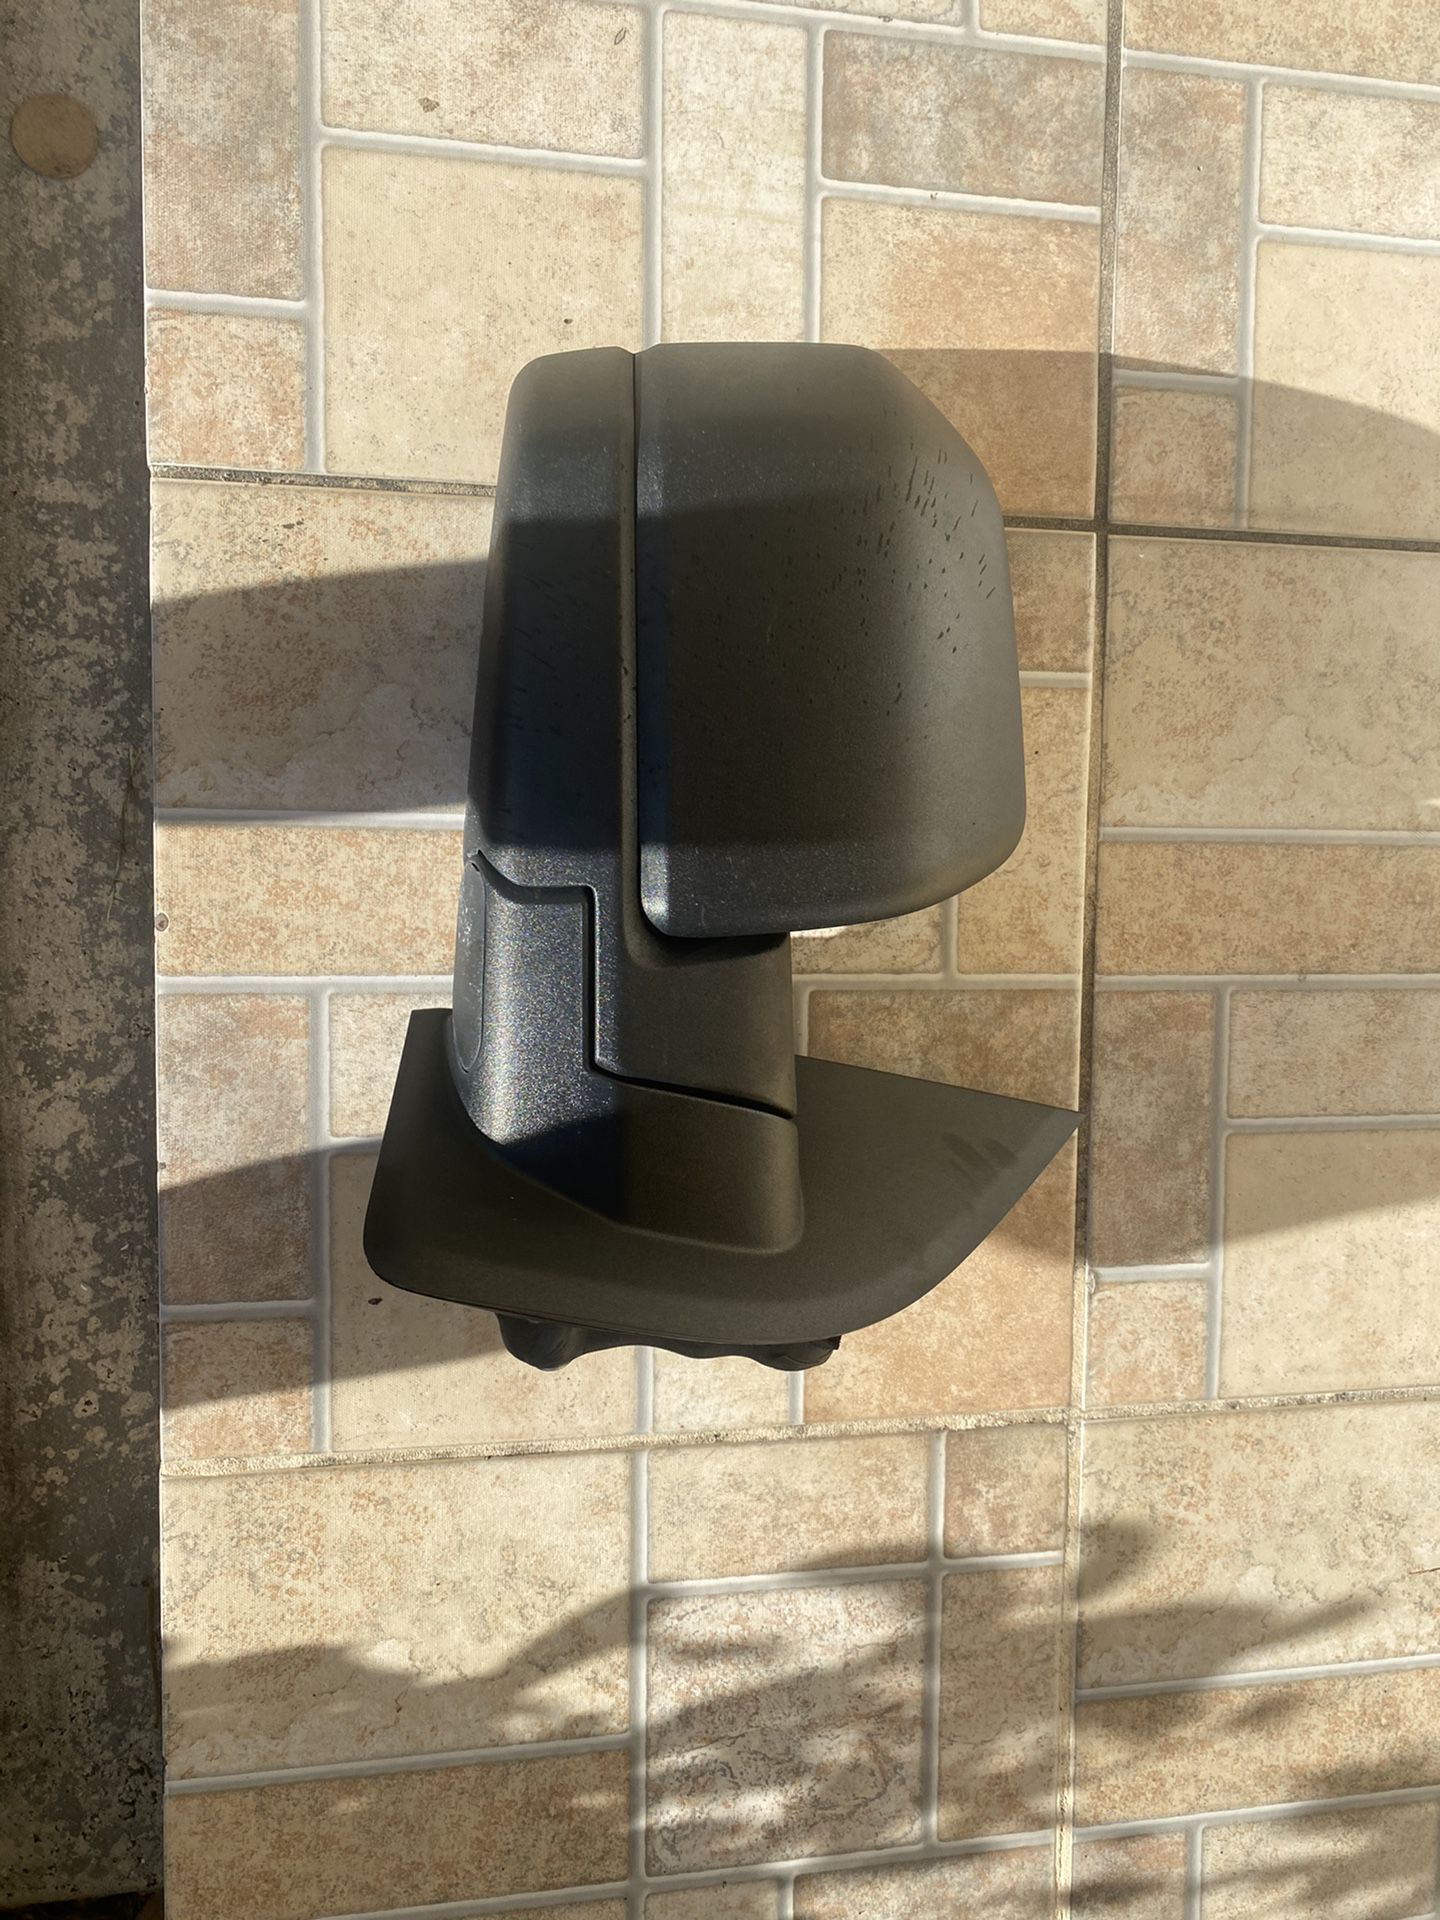 2015-2018 Ford F-150 Mirrors